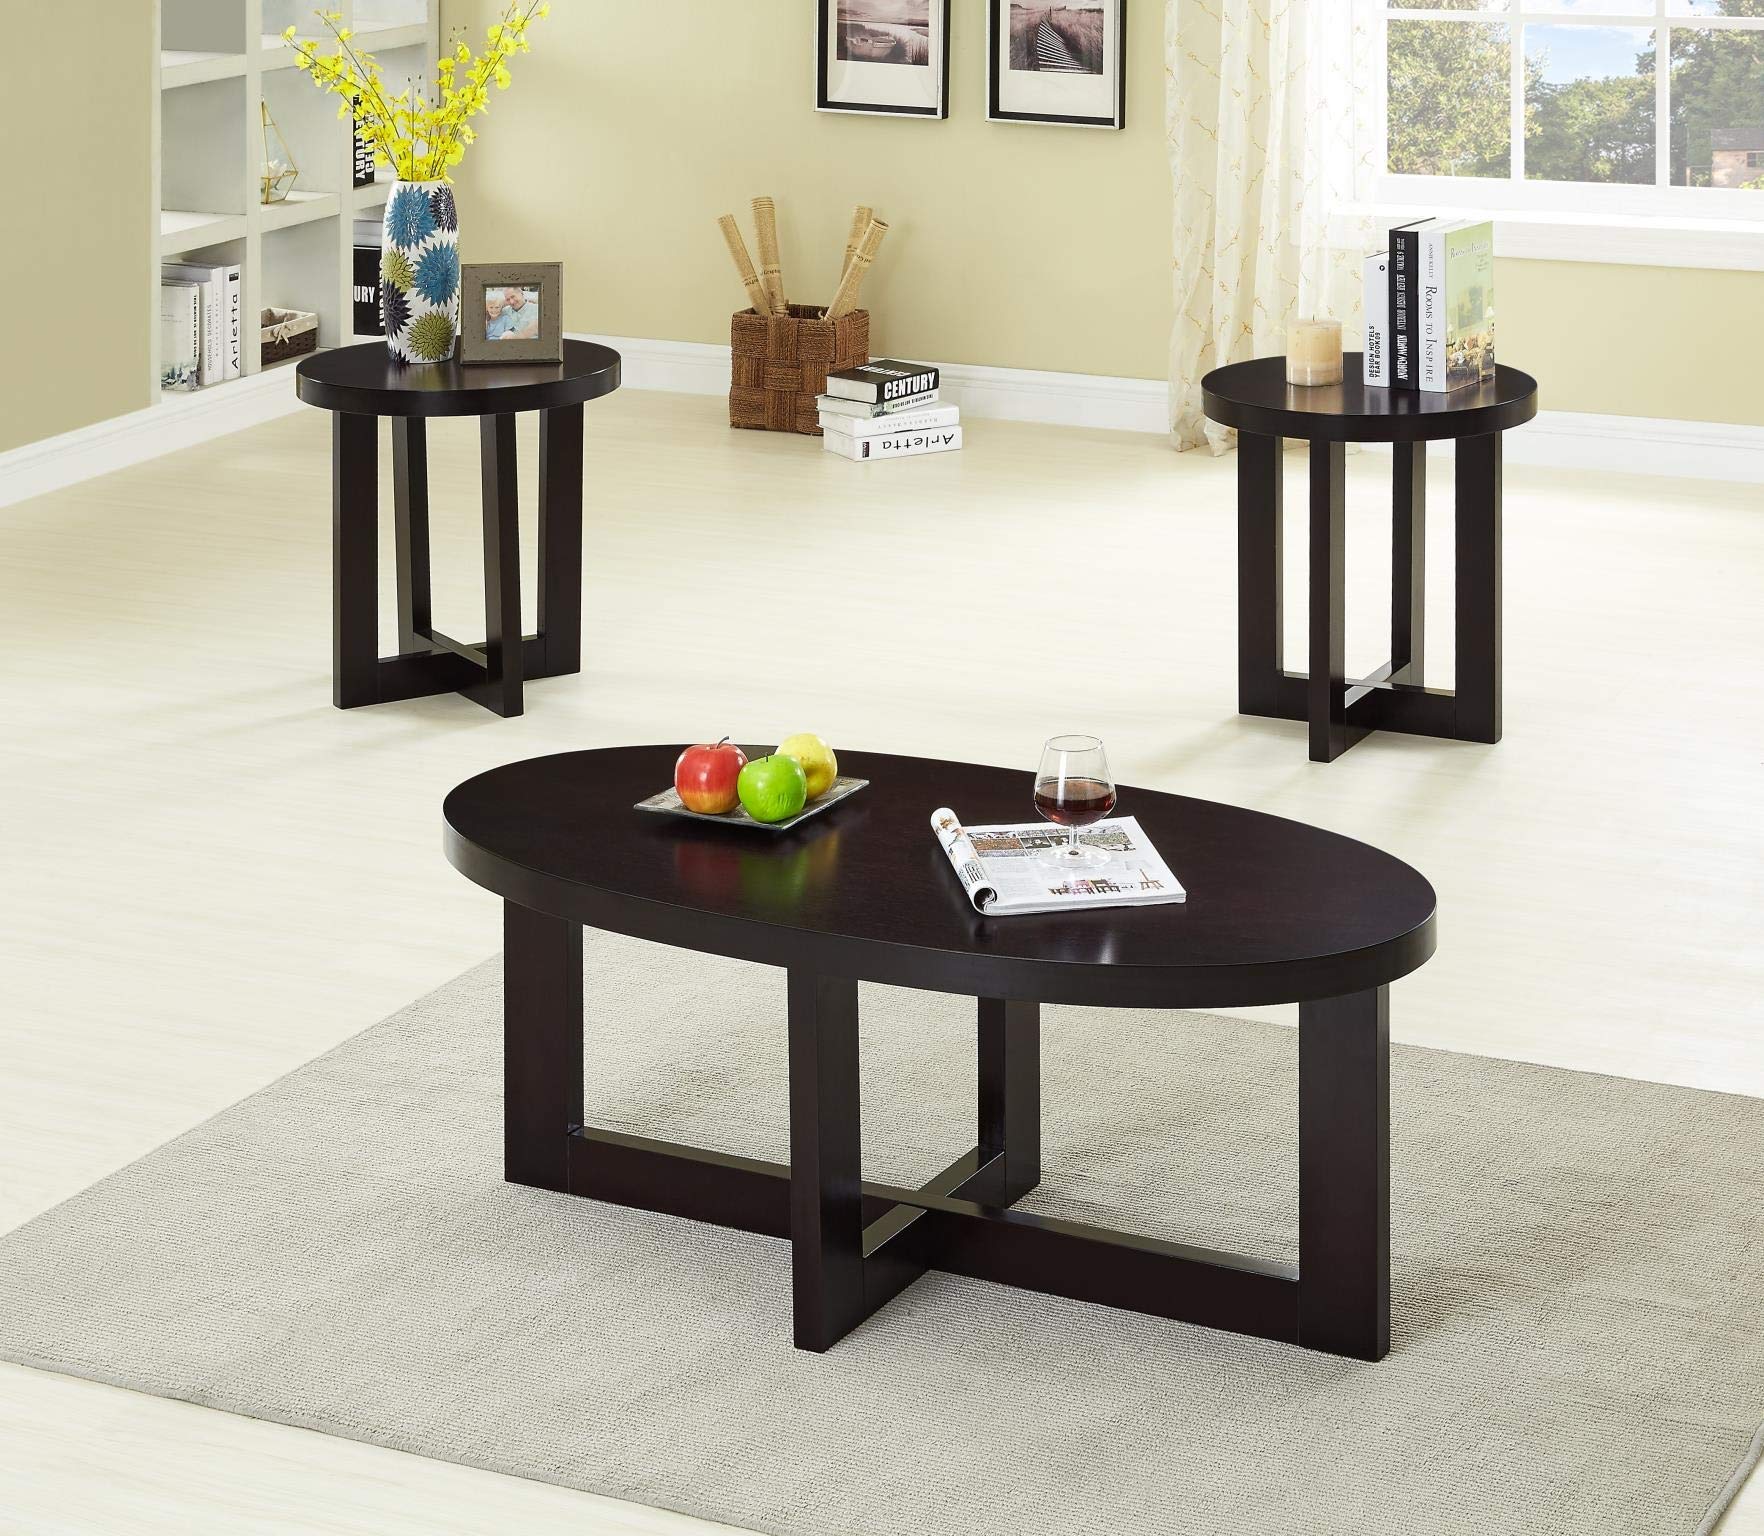 GTU Furniture Ocassional, Contemporary Modern, Transitional Oval Accent Table Set, 1 Coffee Table and 2 End Tables with a Dark Espresso Finish, Mesitas para Sala